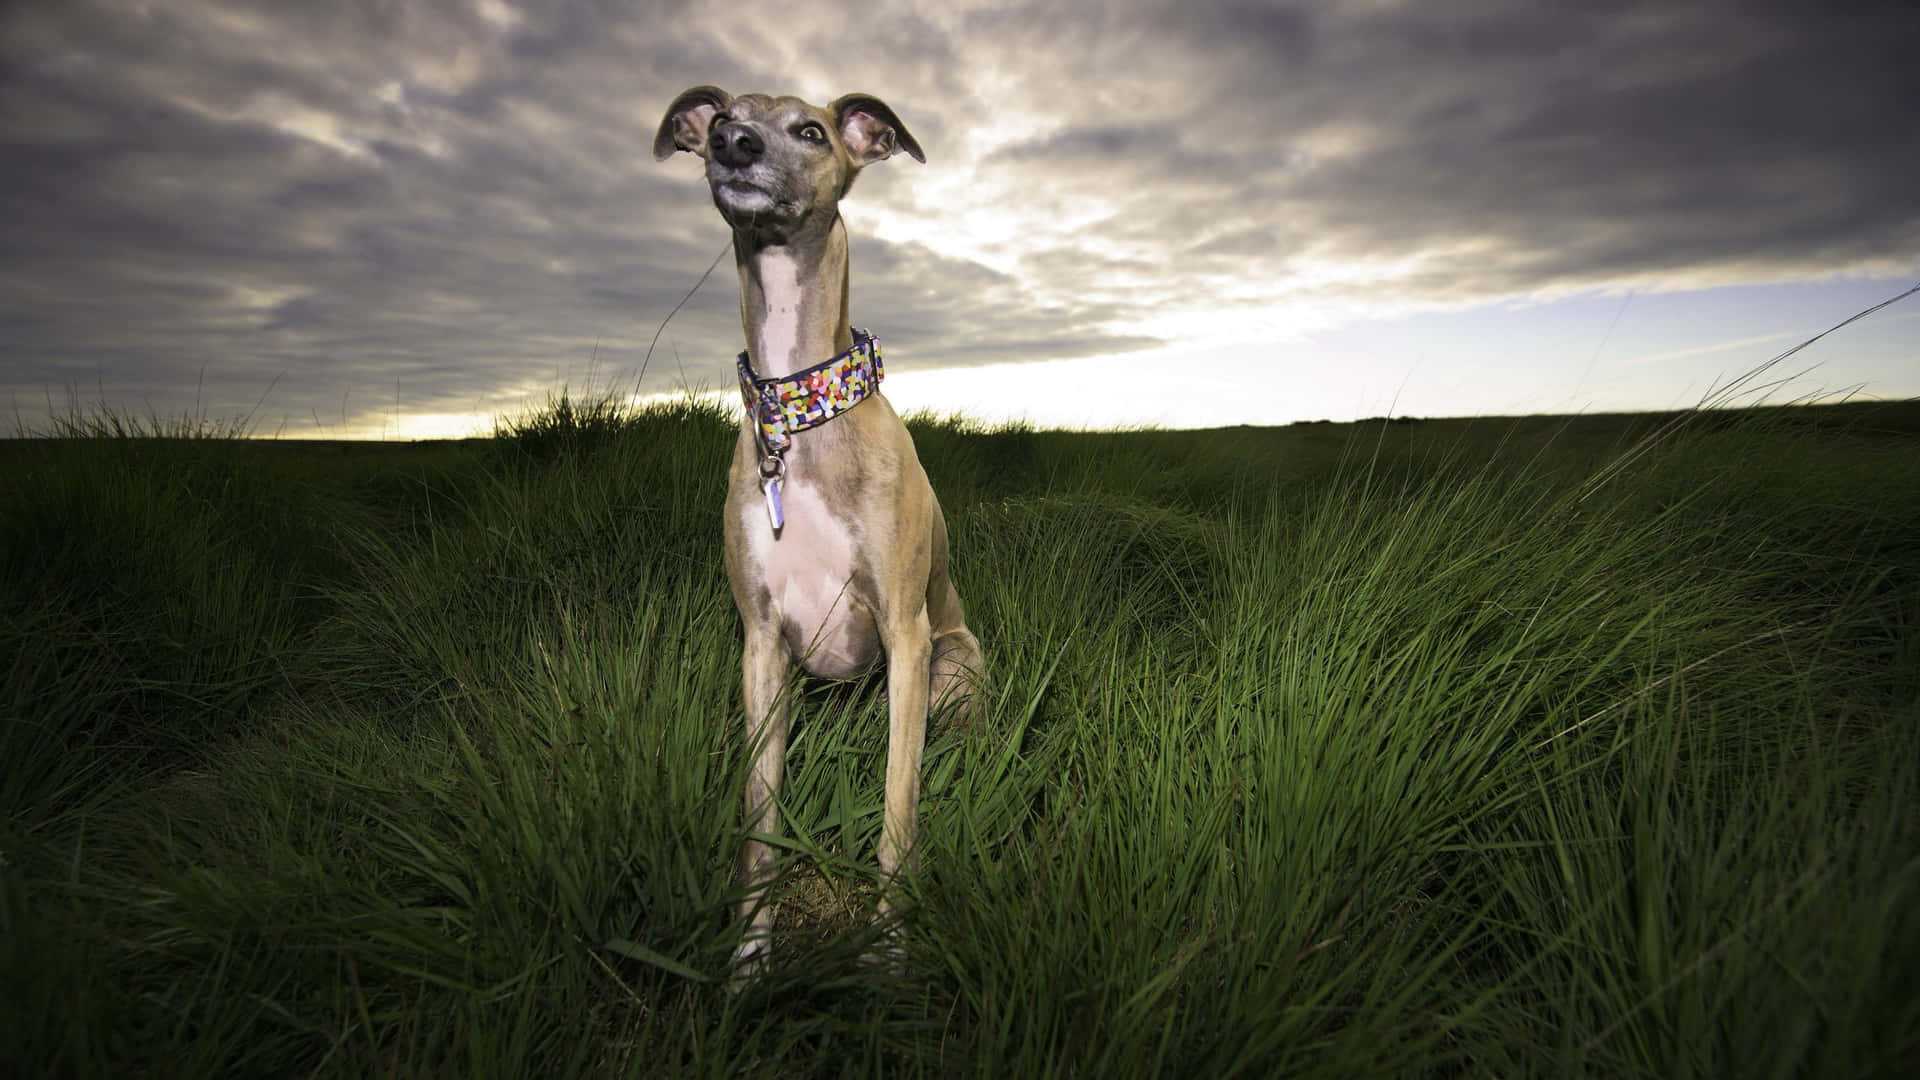 A Greyhound Standing In A Field With A Cloudy Sky